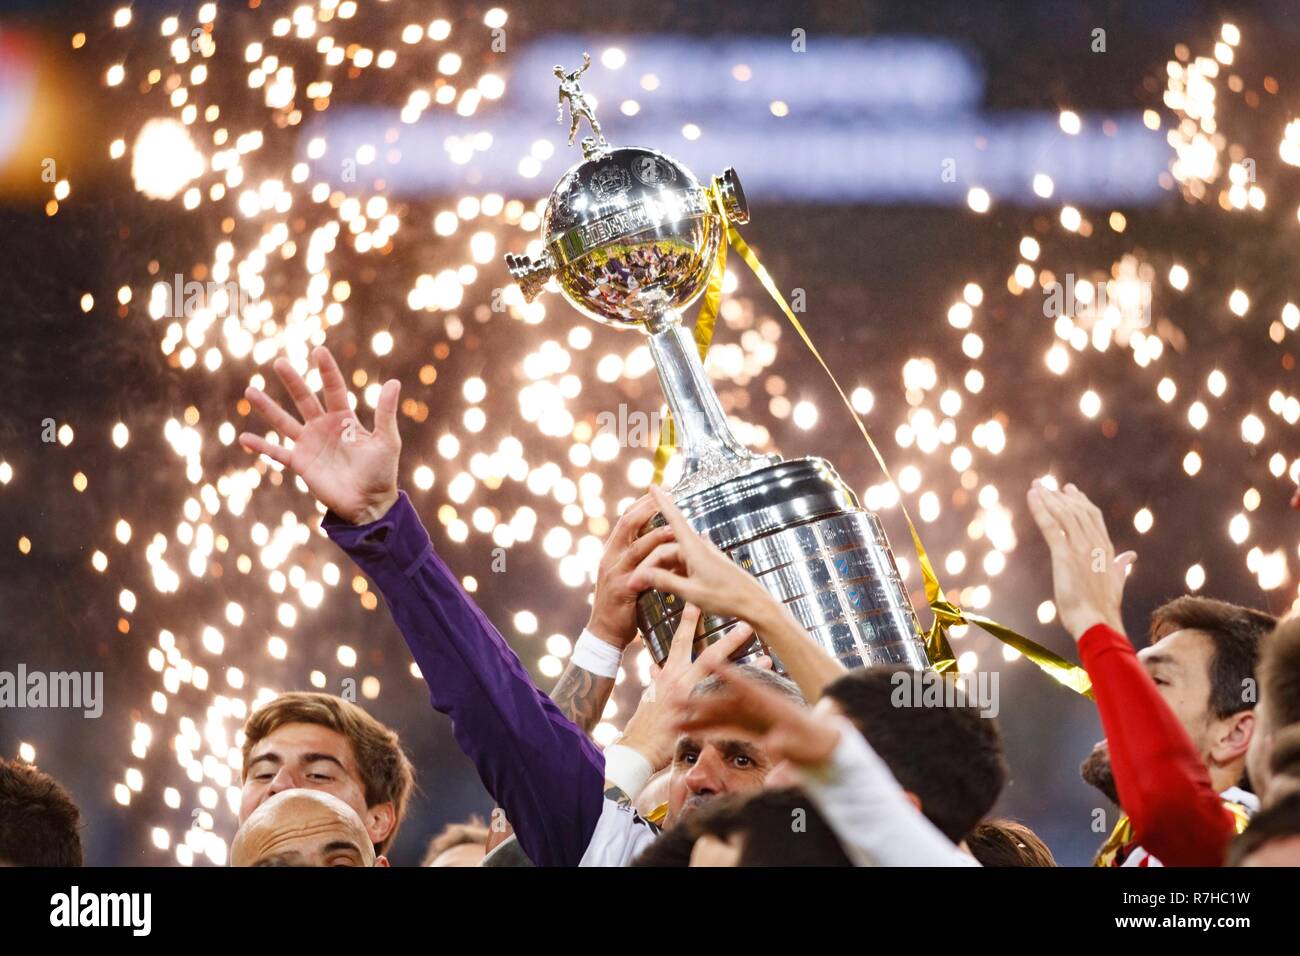 River Plate players celebrates victory in the Copa Libertadores final 2018/19 match between Boca Juniors and River Plate, at Santiago Bernabeu Stadium in Madrid on December 9, 2018. (Photo by Guille Martinez/Cordon Press)  Cordon Press Stock Photo